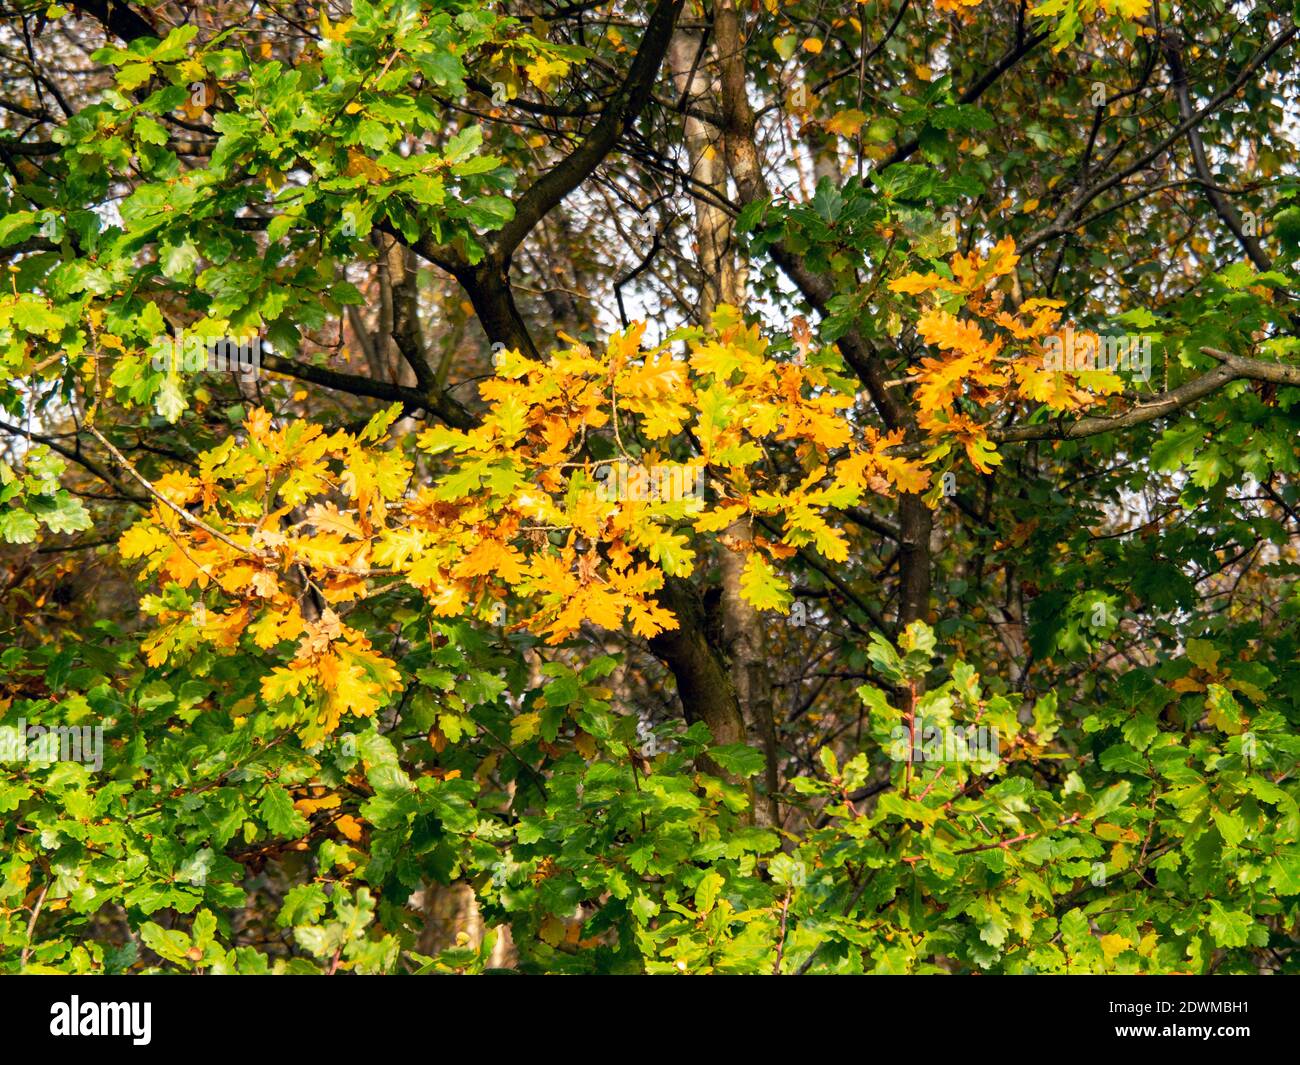 Oak tree with orange and green leaves in early autumn Stock Photo